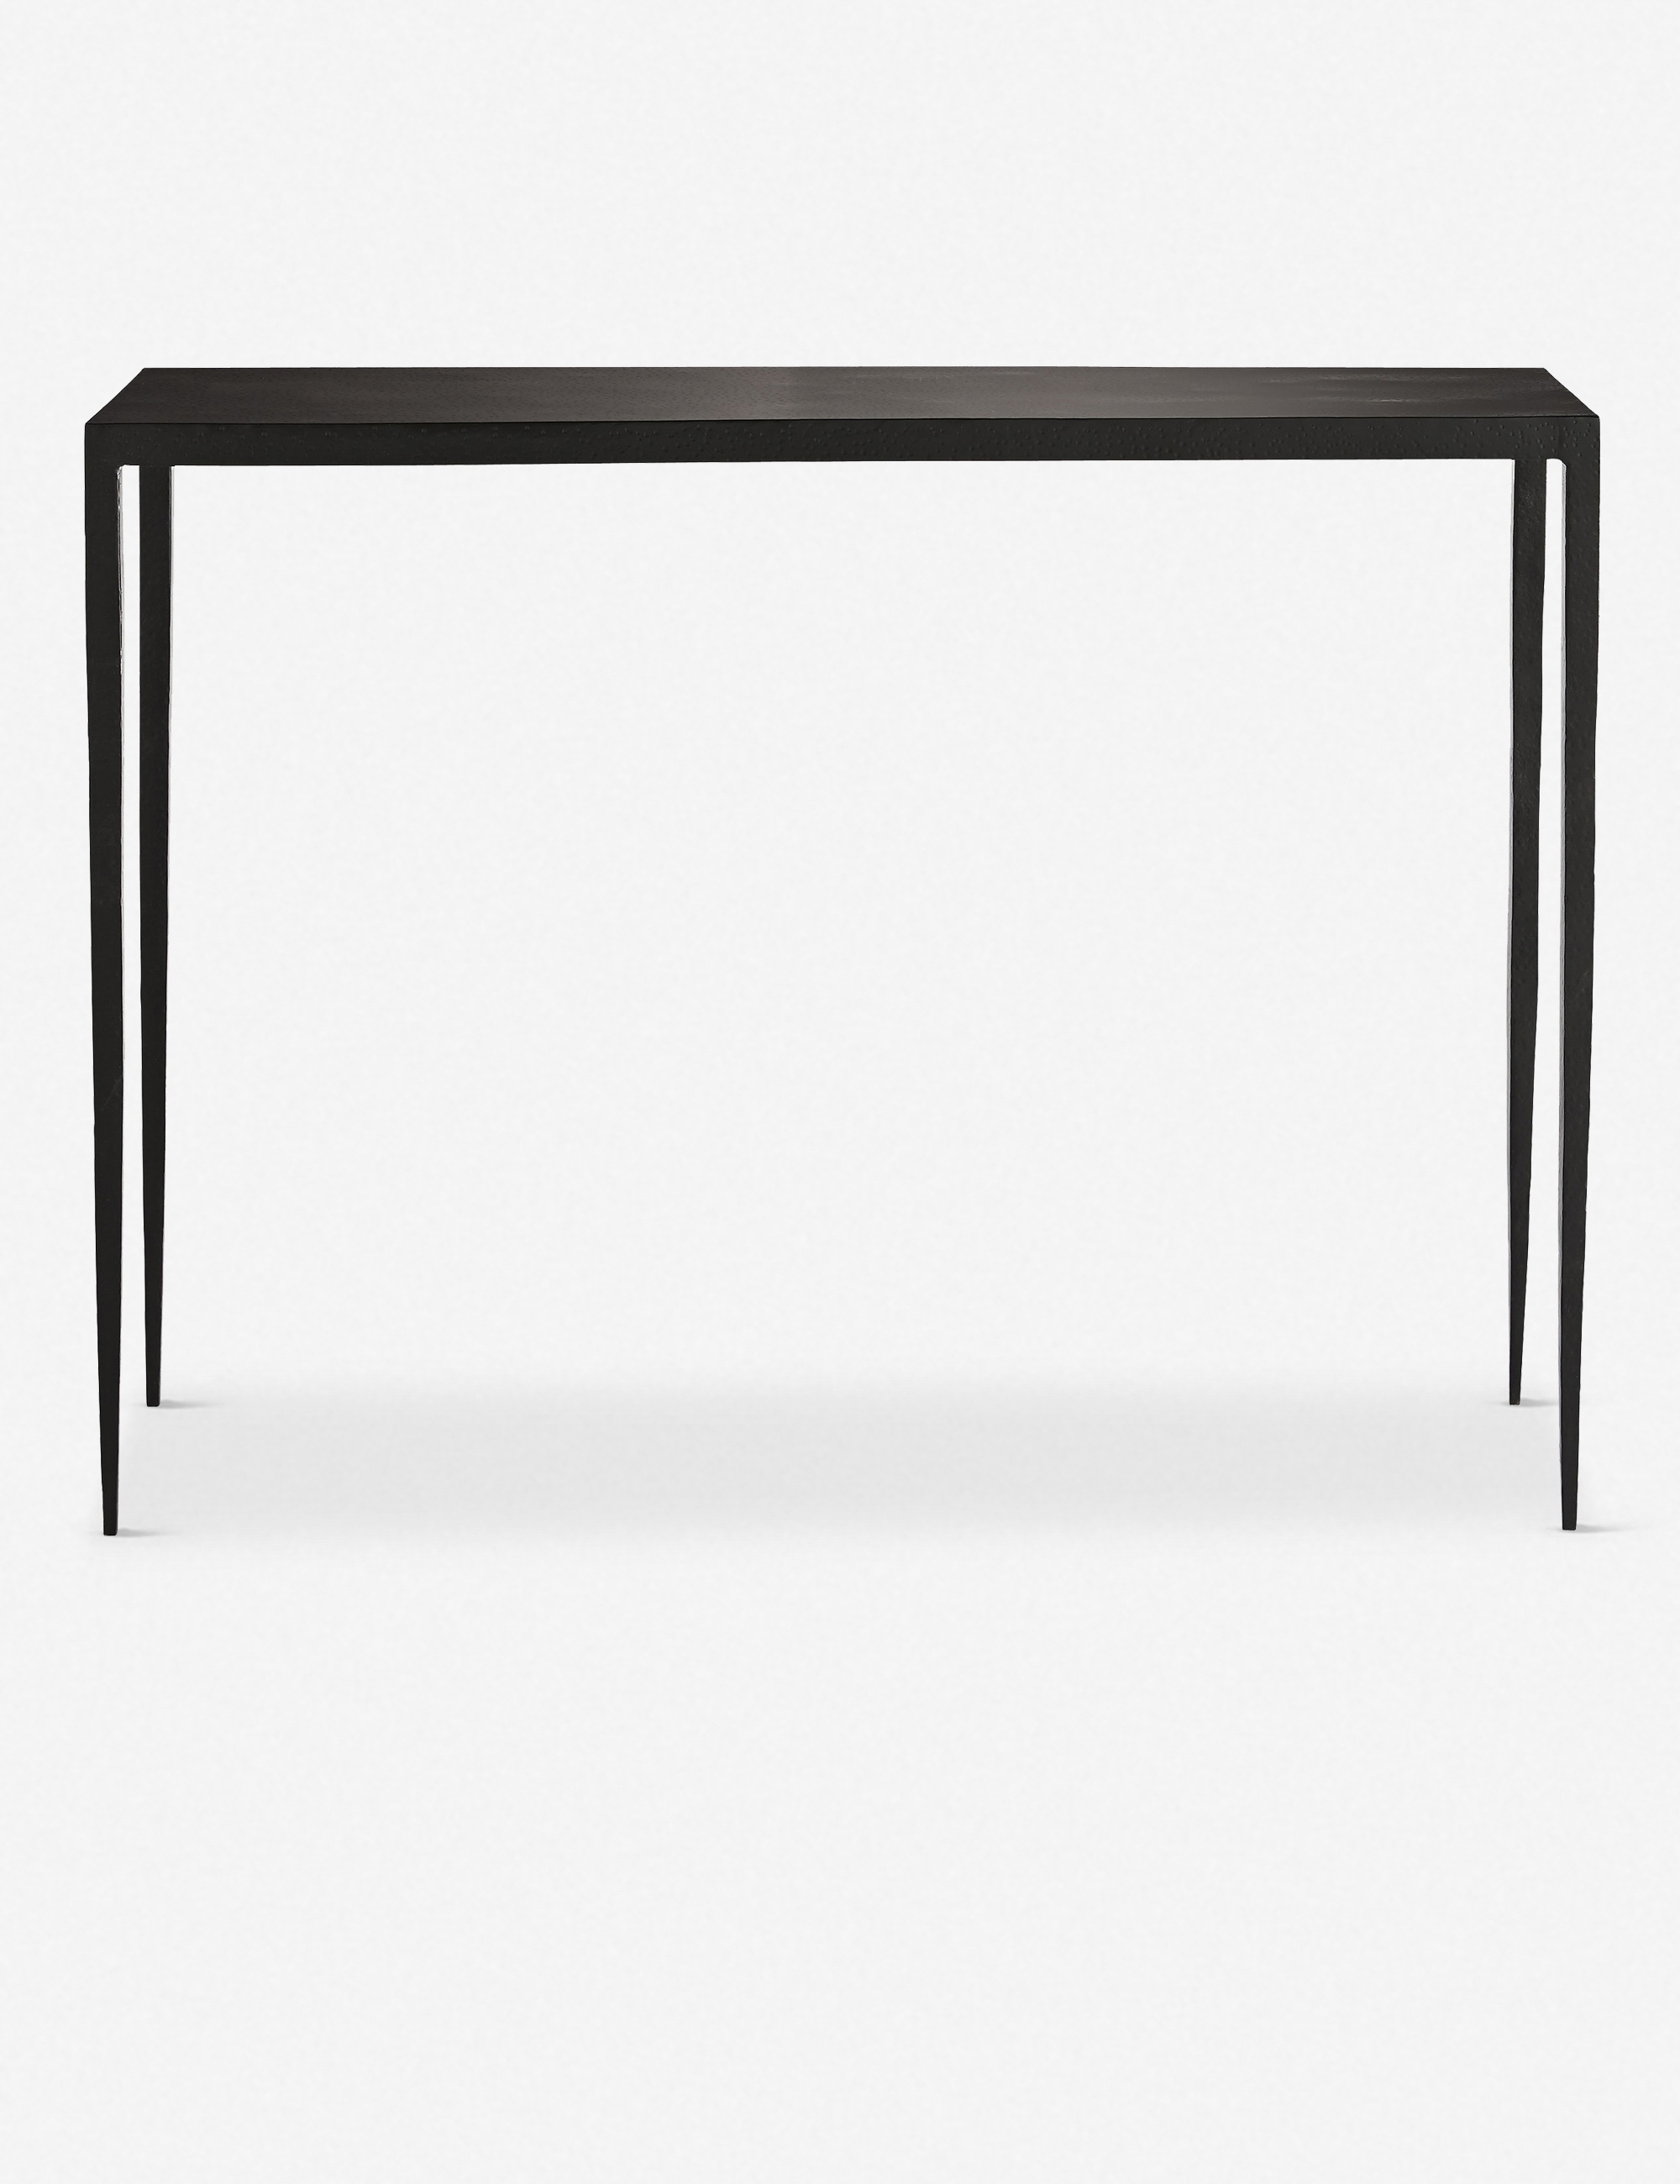 Hogan Console Table by Arteriors - Image 0